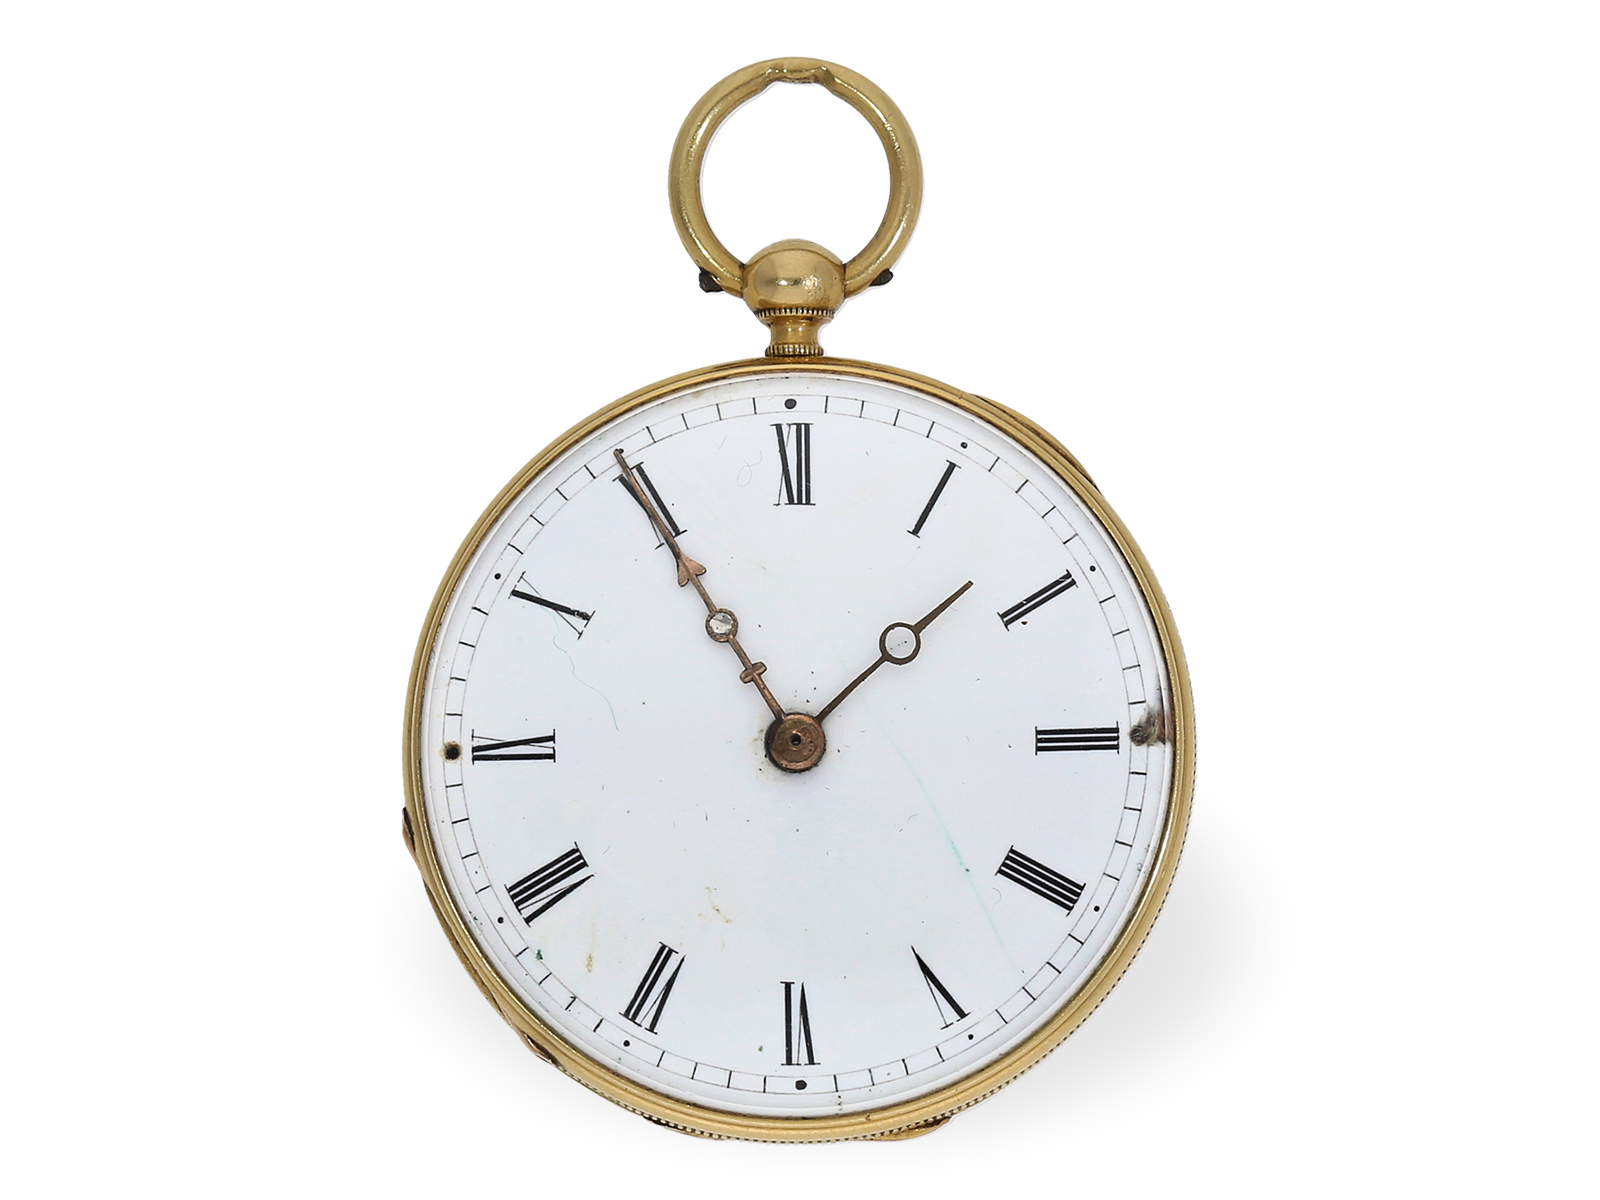 Pocket watch: rare lepine with gold/jasper case and gold/jasper chatelaine, ca. 1850 - Image 3 of 8